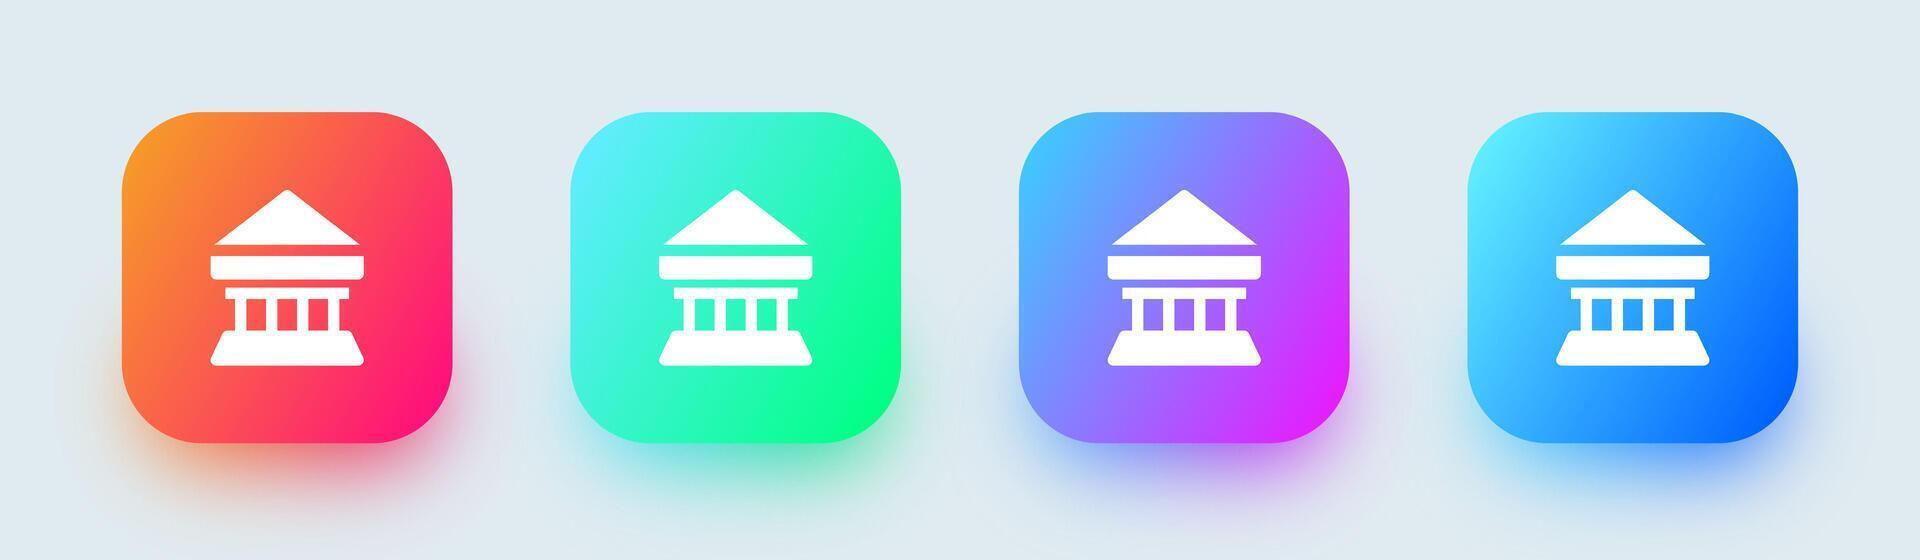 Bank solid icon in square gradient colors. Finance signs vector illustration.